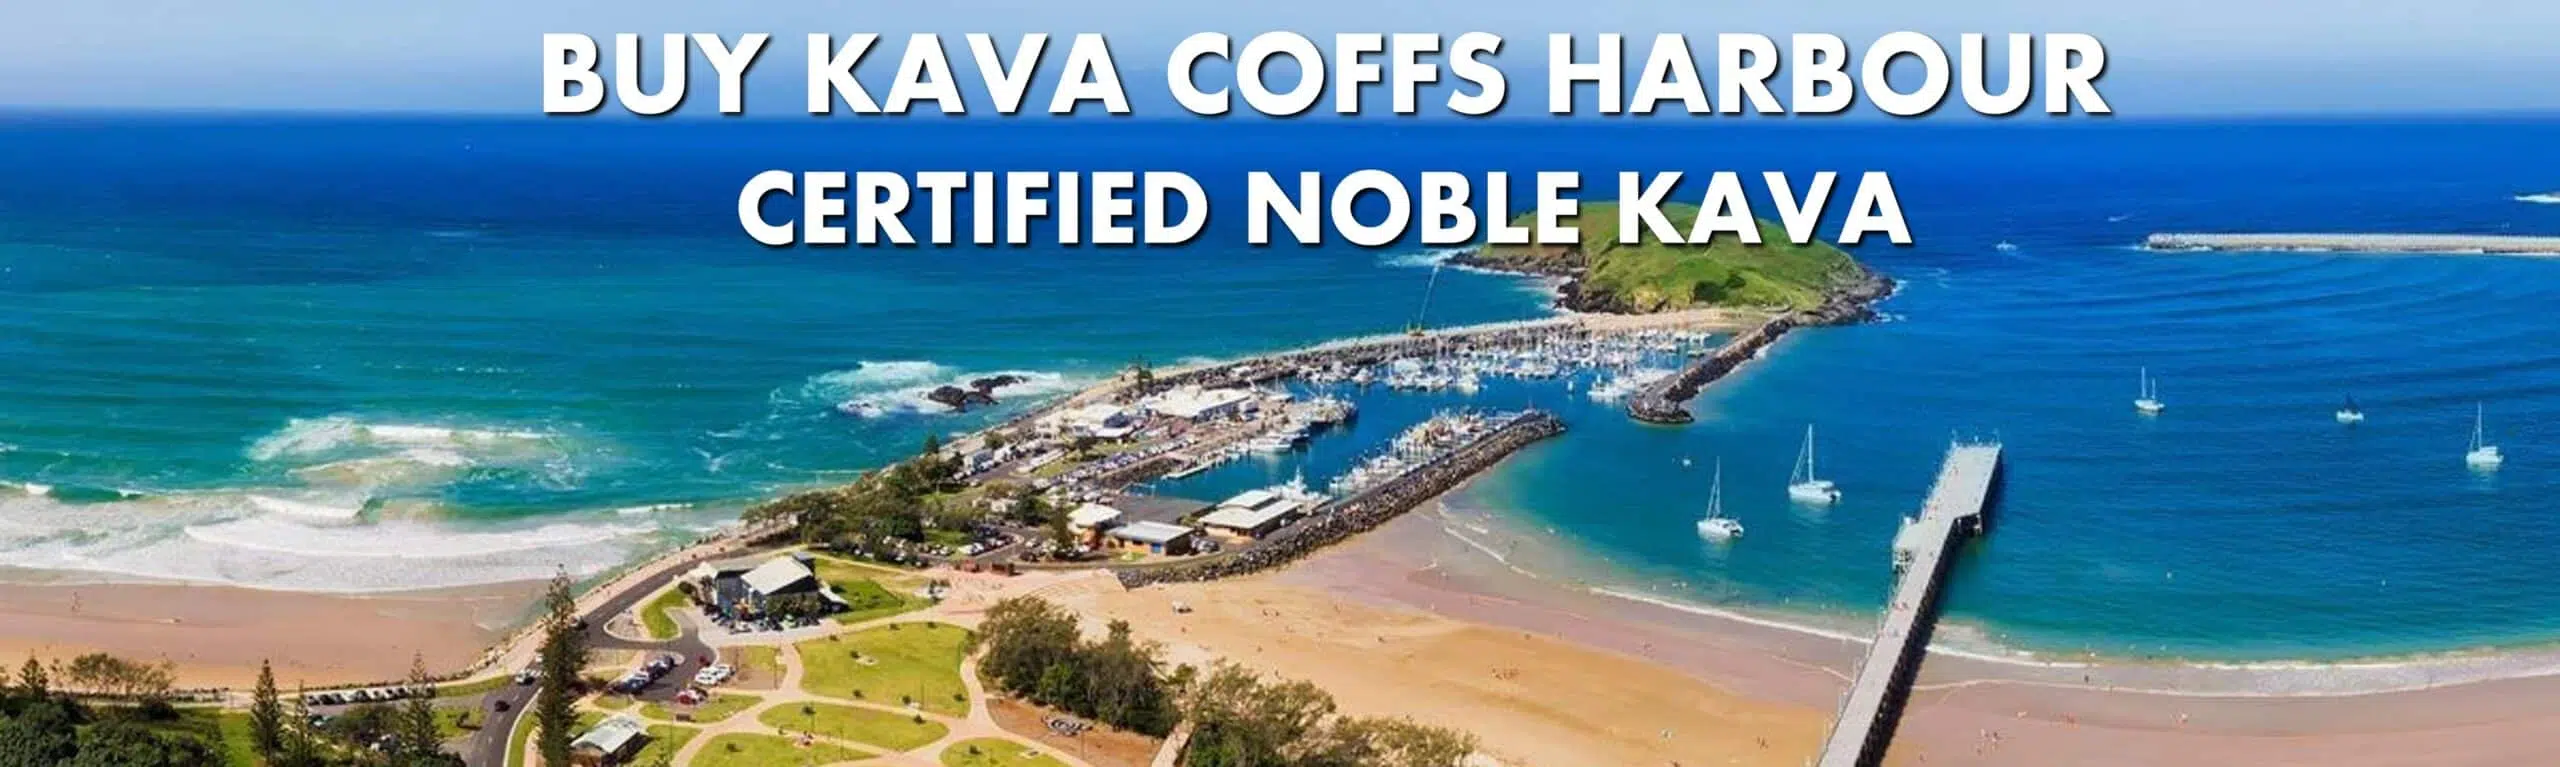 Sandy Beach and Marina in Coffs Harbour New South Wales with caption Buy Kava Coffs Harbour Certified Noble Kava